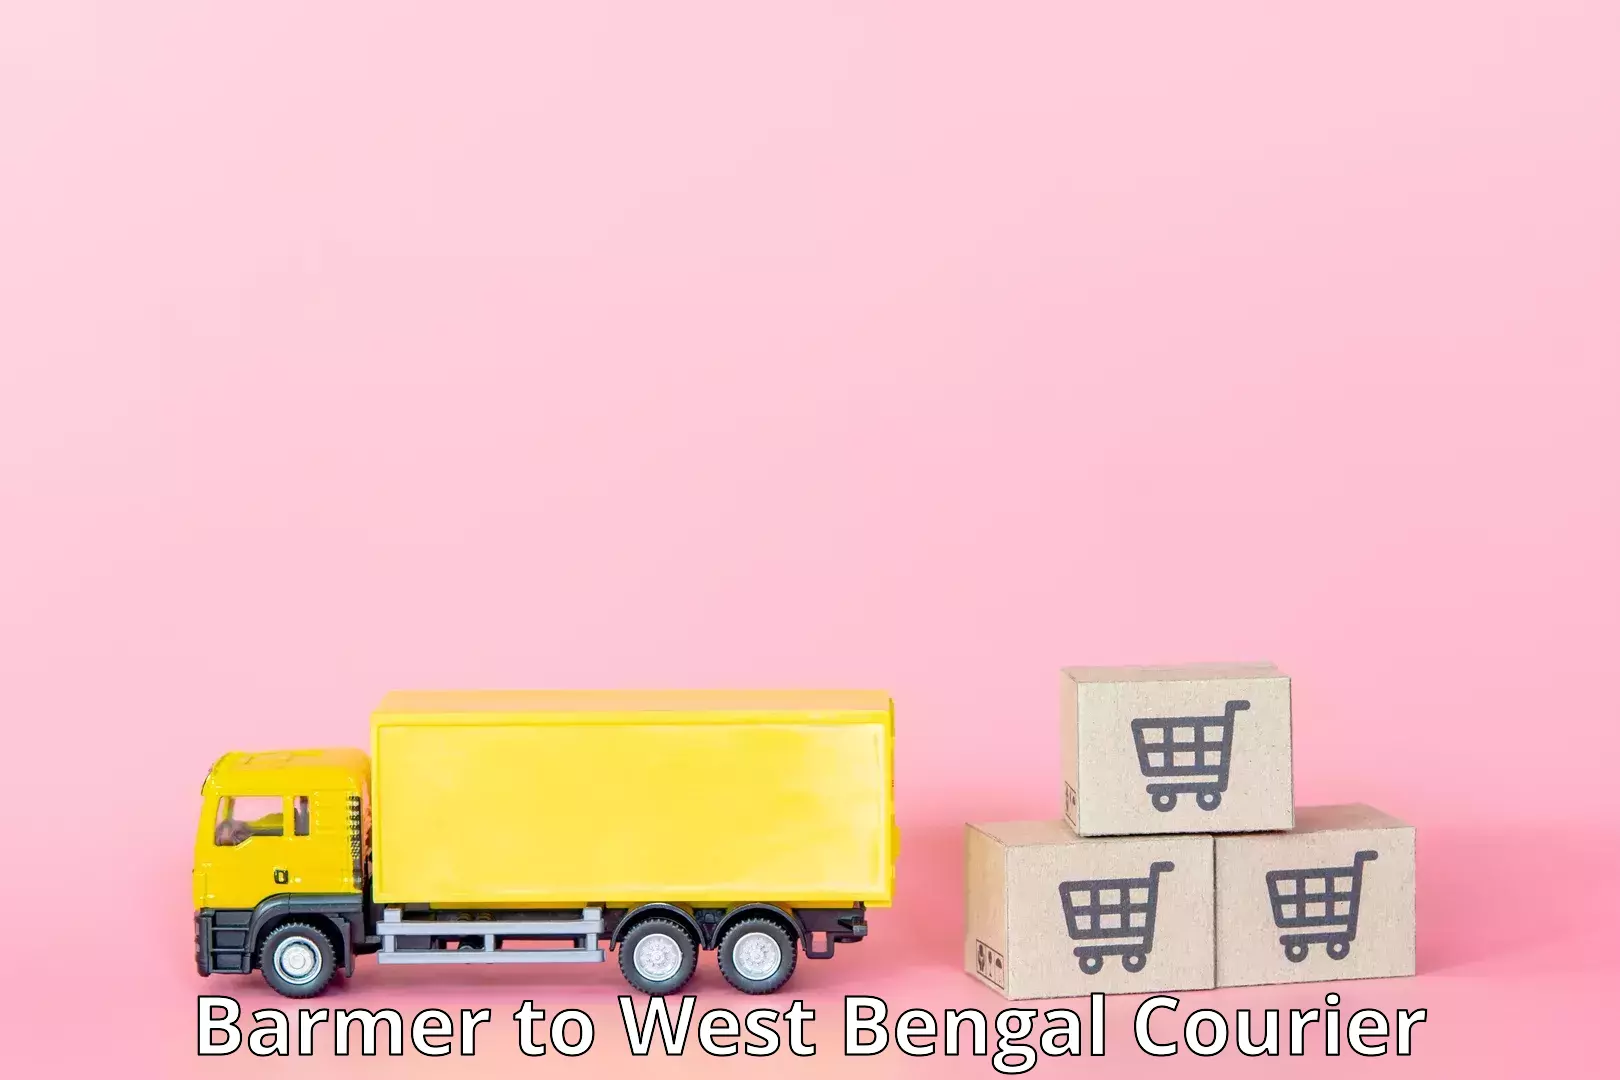 Subscription-based courier Barmer to West Bengal